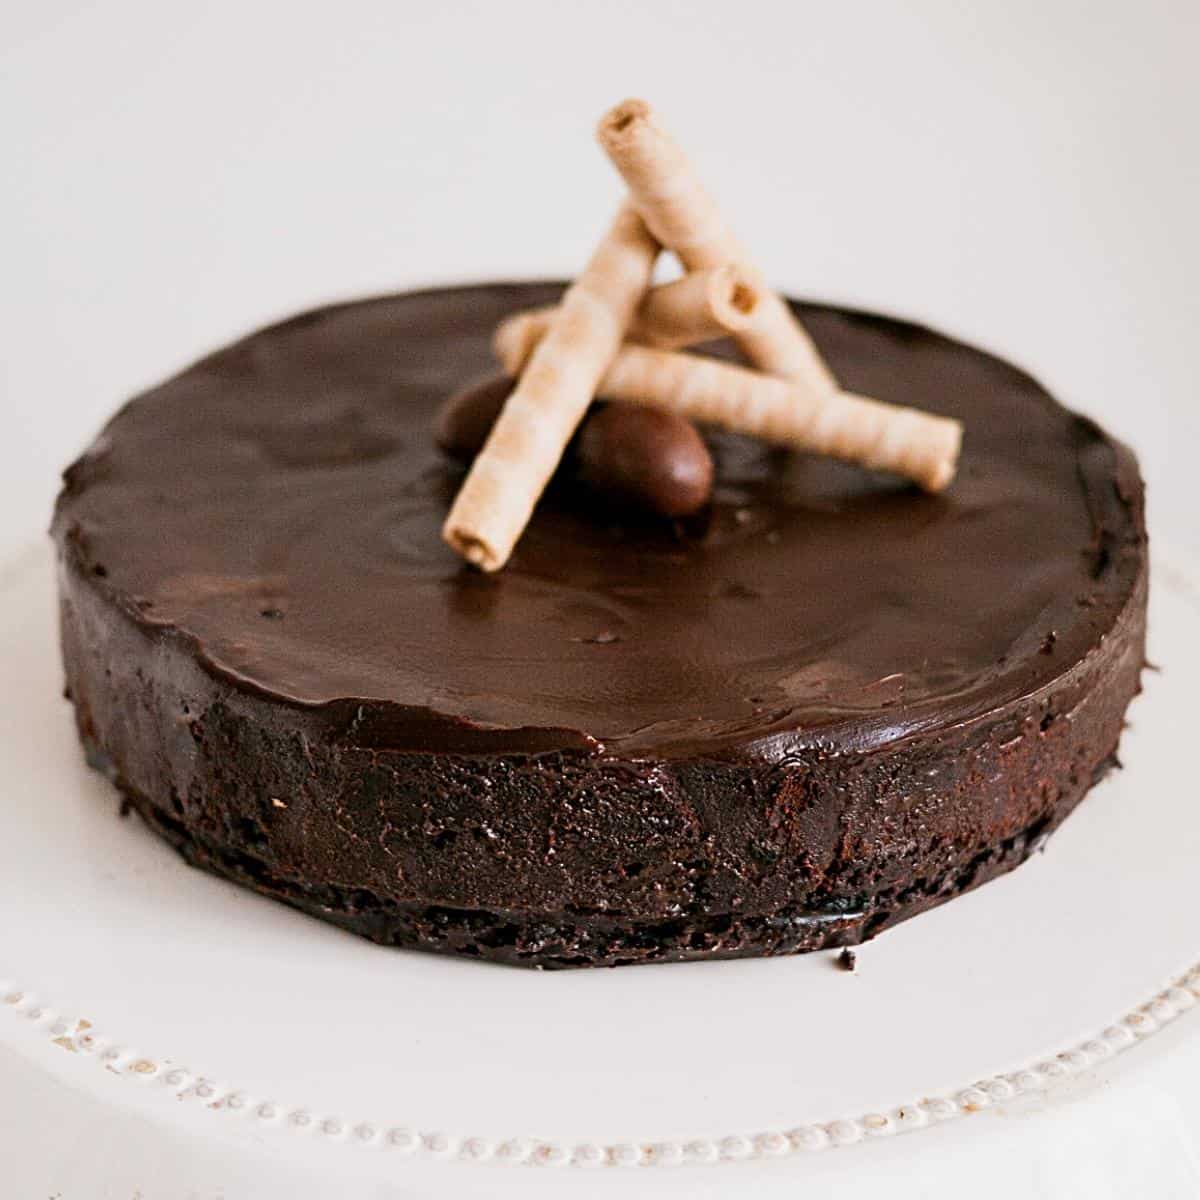 Chocolate cake - flourless topped with wafers.